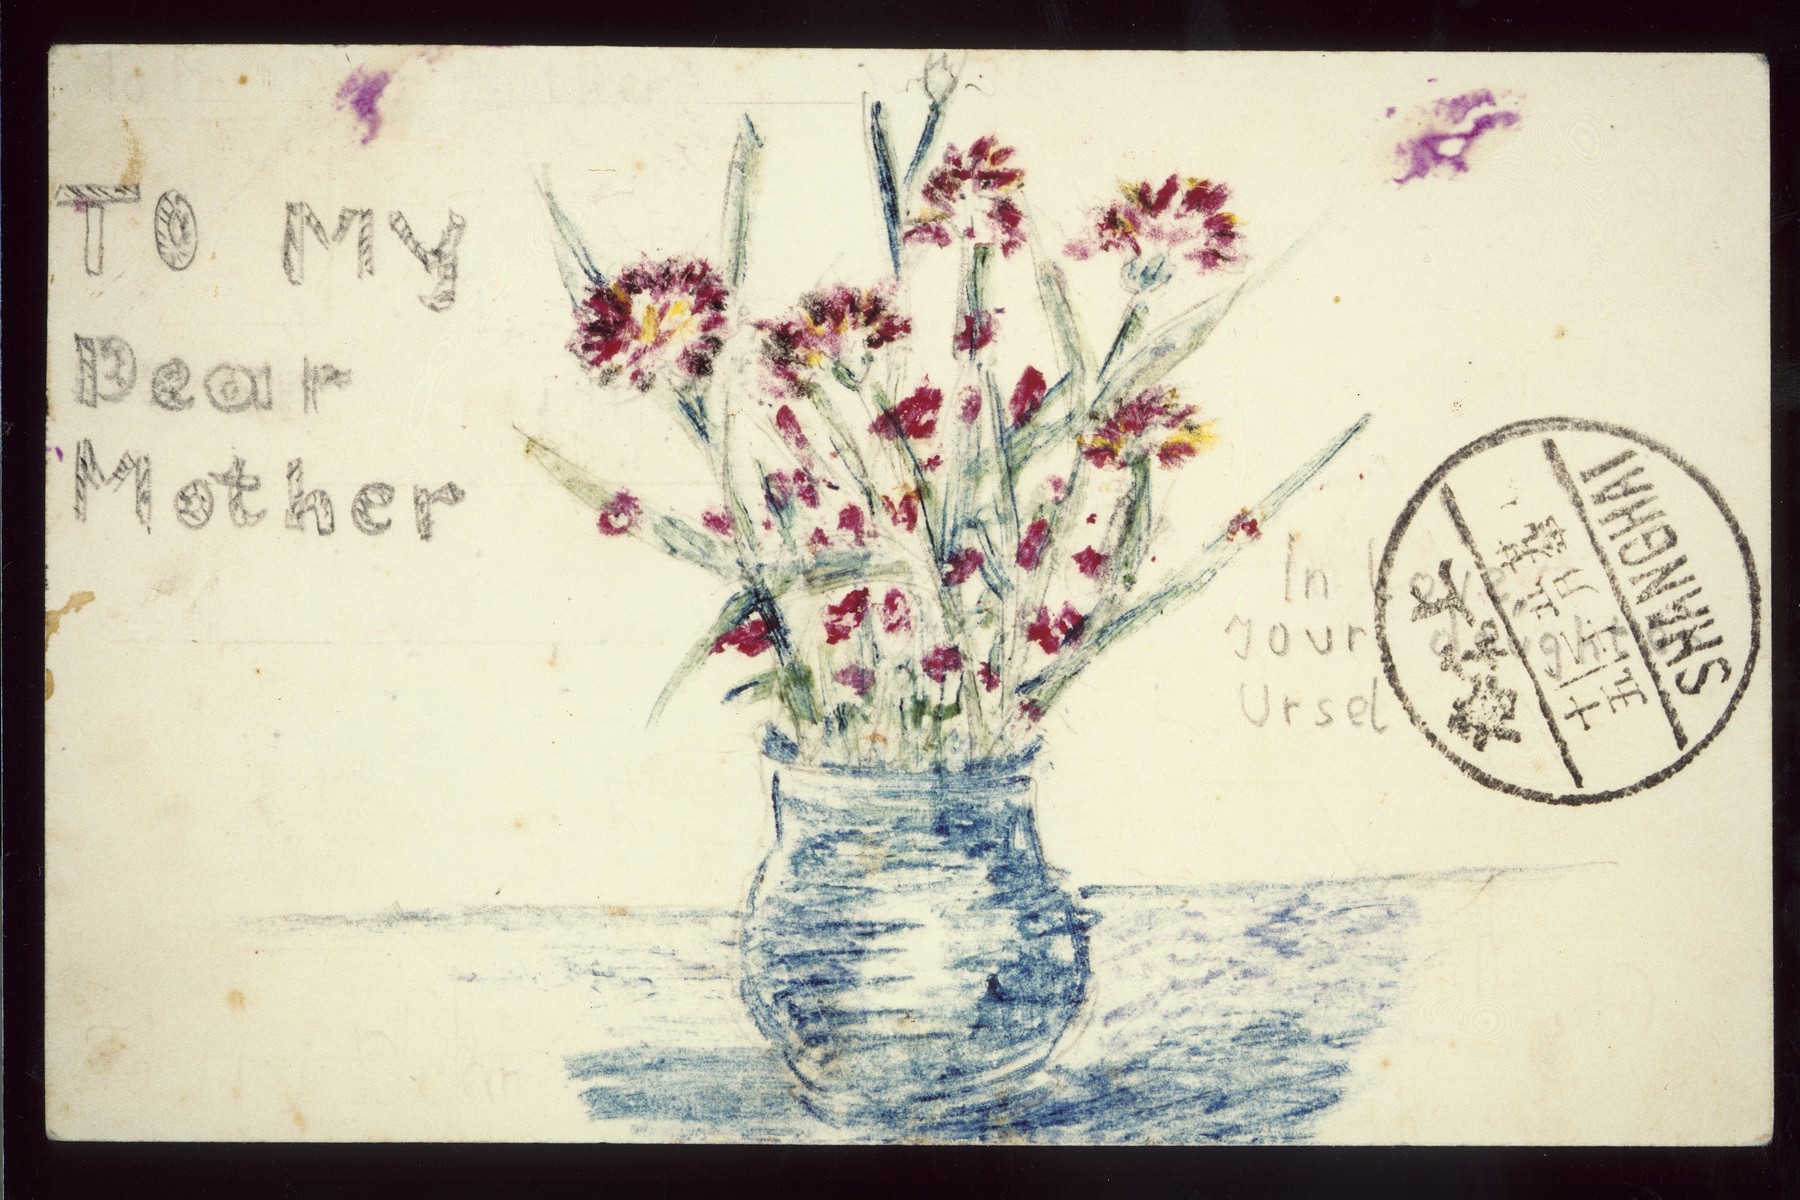 Mothers' Day greeting on a pre-printed Shanghai Jewish Youth Association postcard sent to Gerda Harpuder by her daughter Ursula.  The flipside of the postcard features a color drawing of a vase with flowers and a greeting from Ursula.